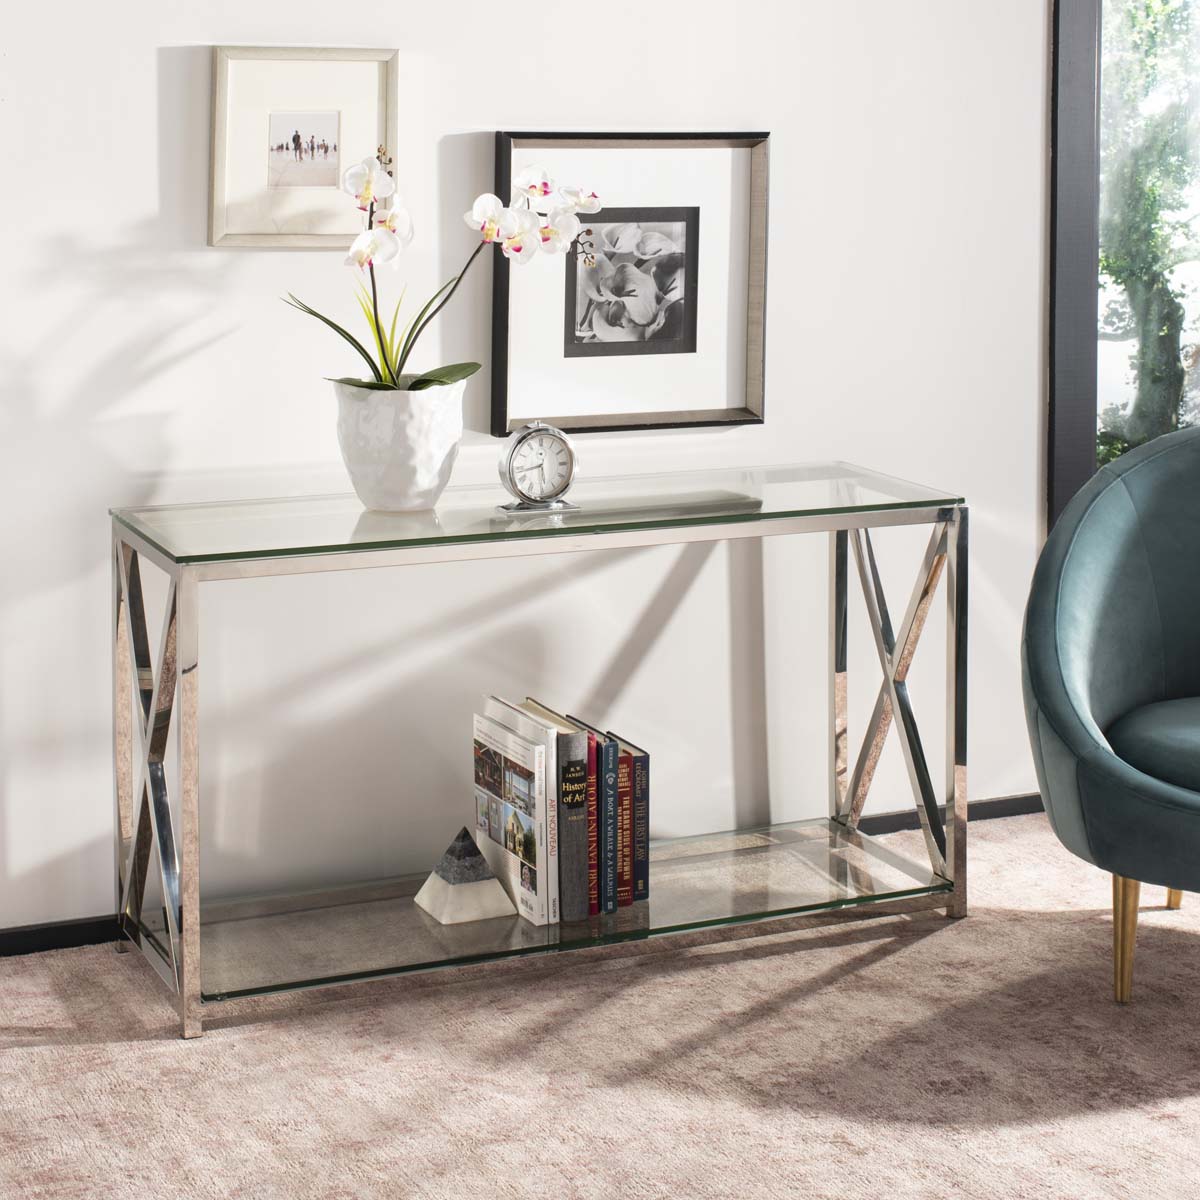 Safavieh Couture Hayward Chrome Console With Glass Top